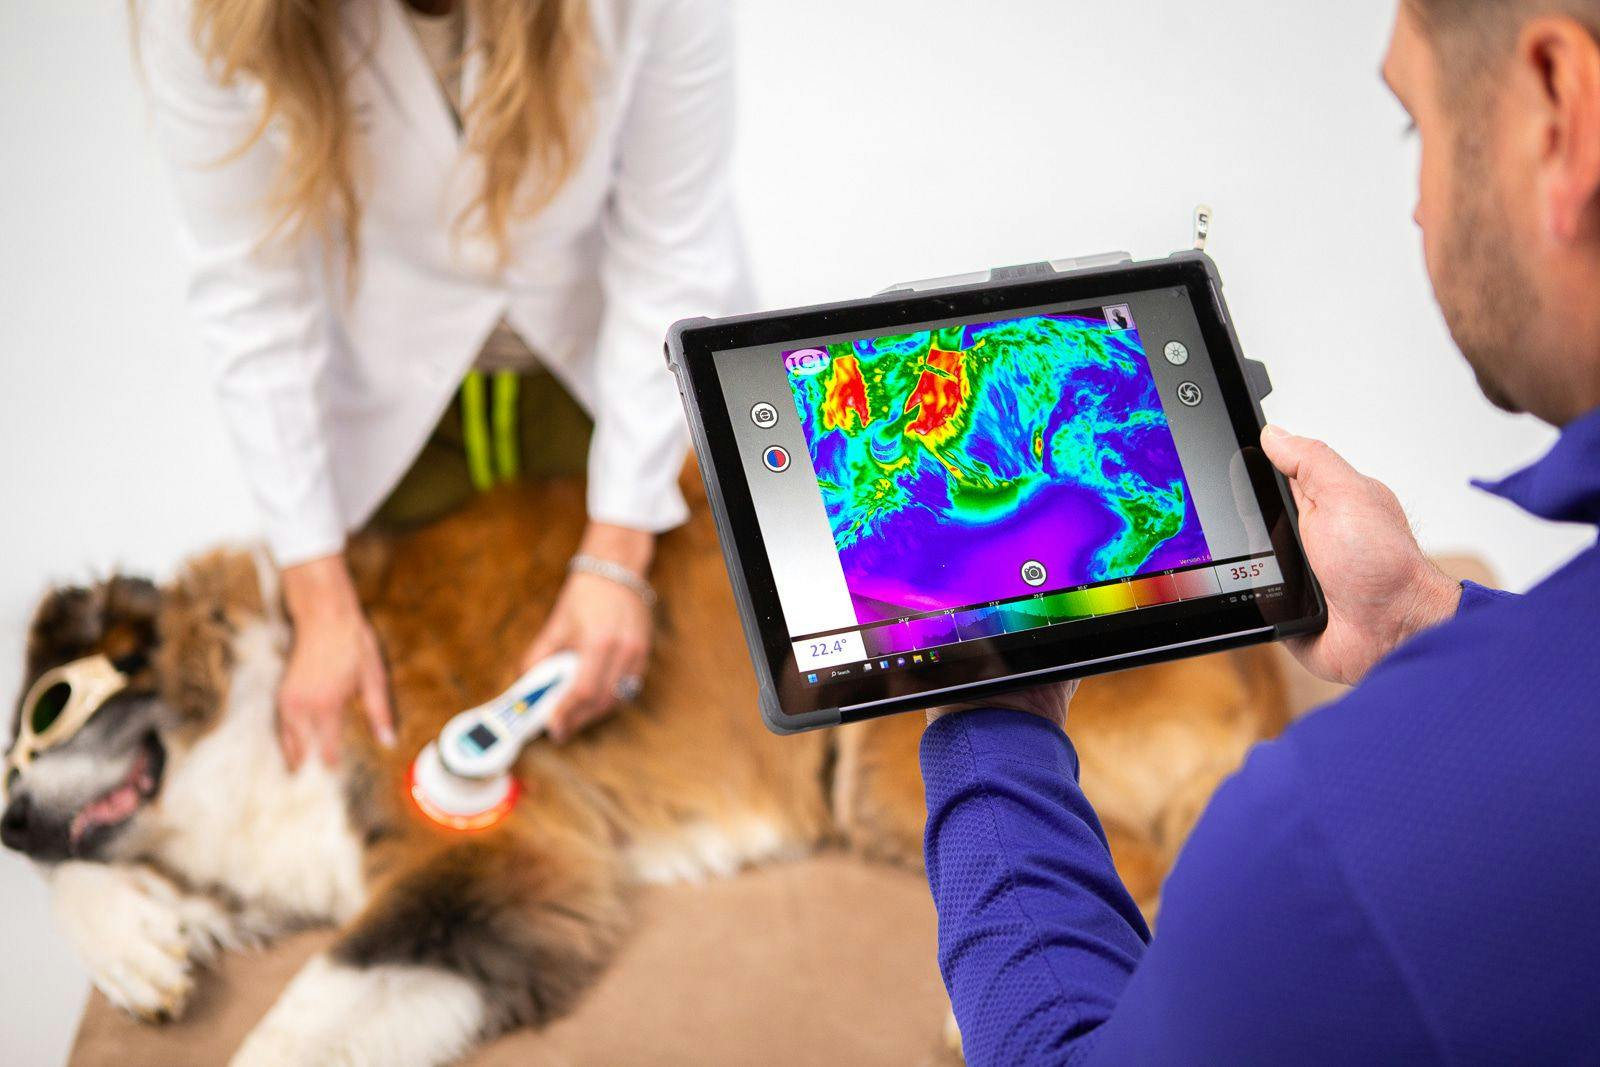 Image courtesy of WellVu Veterinary Thermal Imaging 